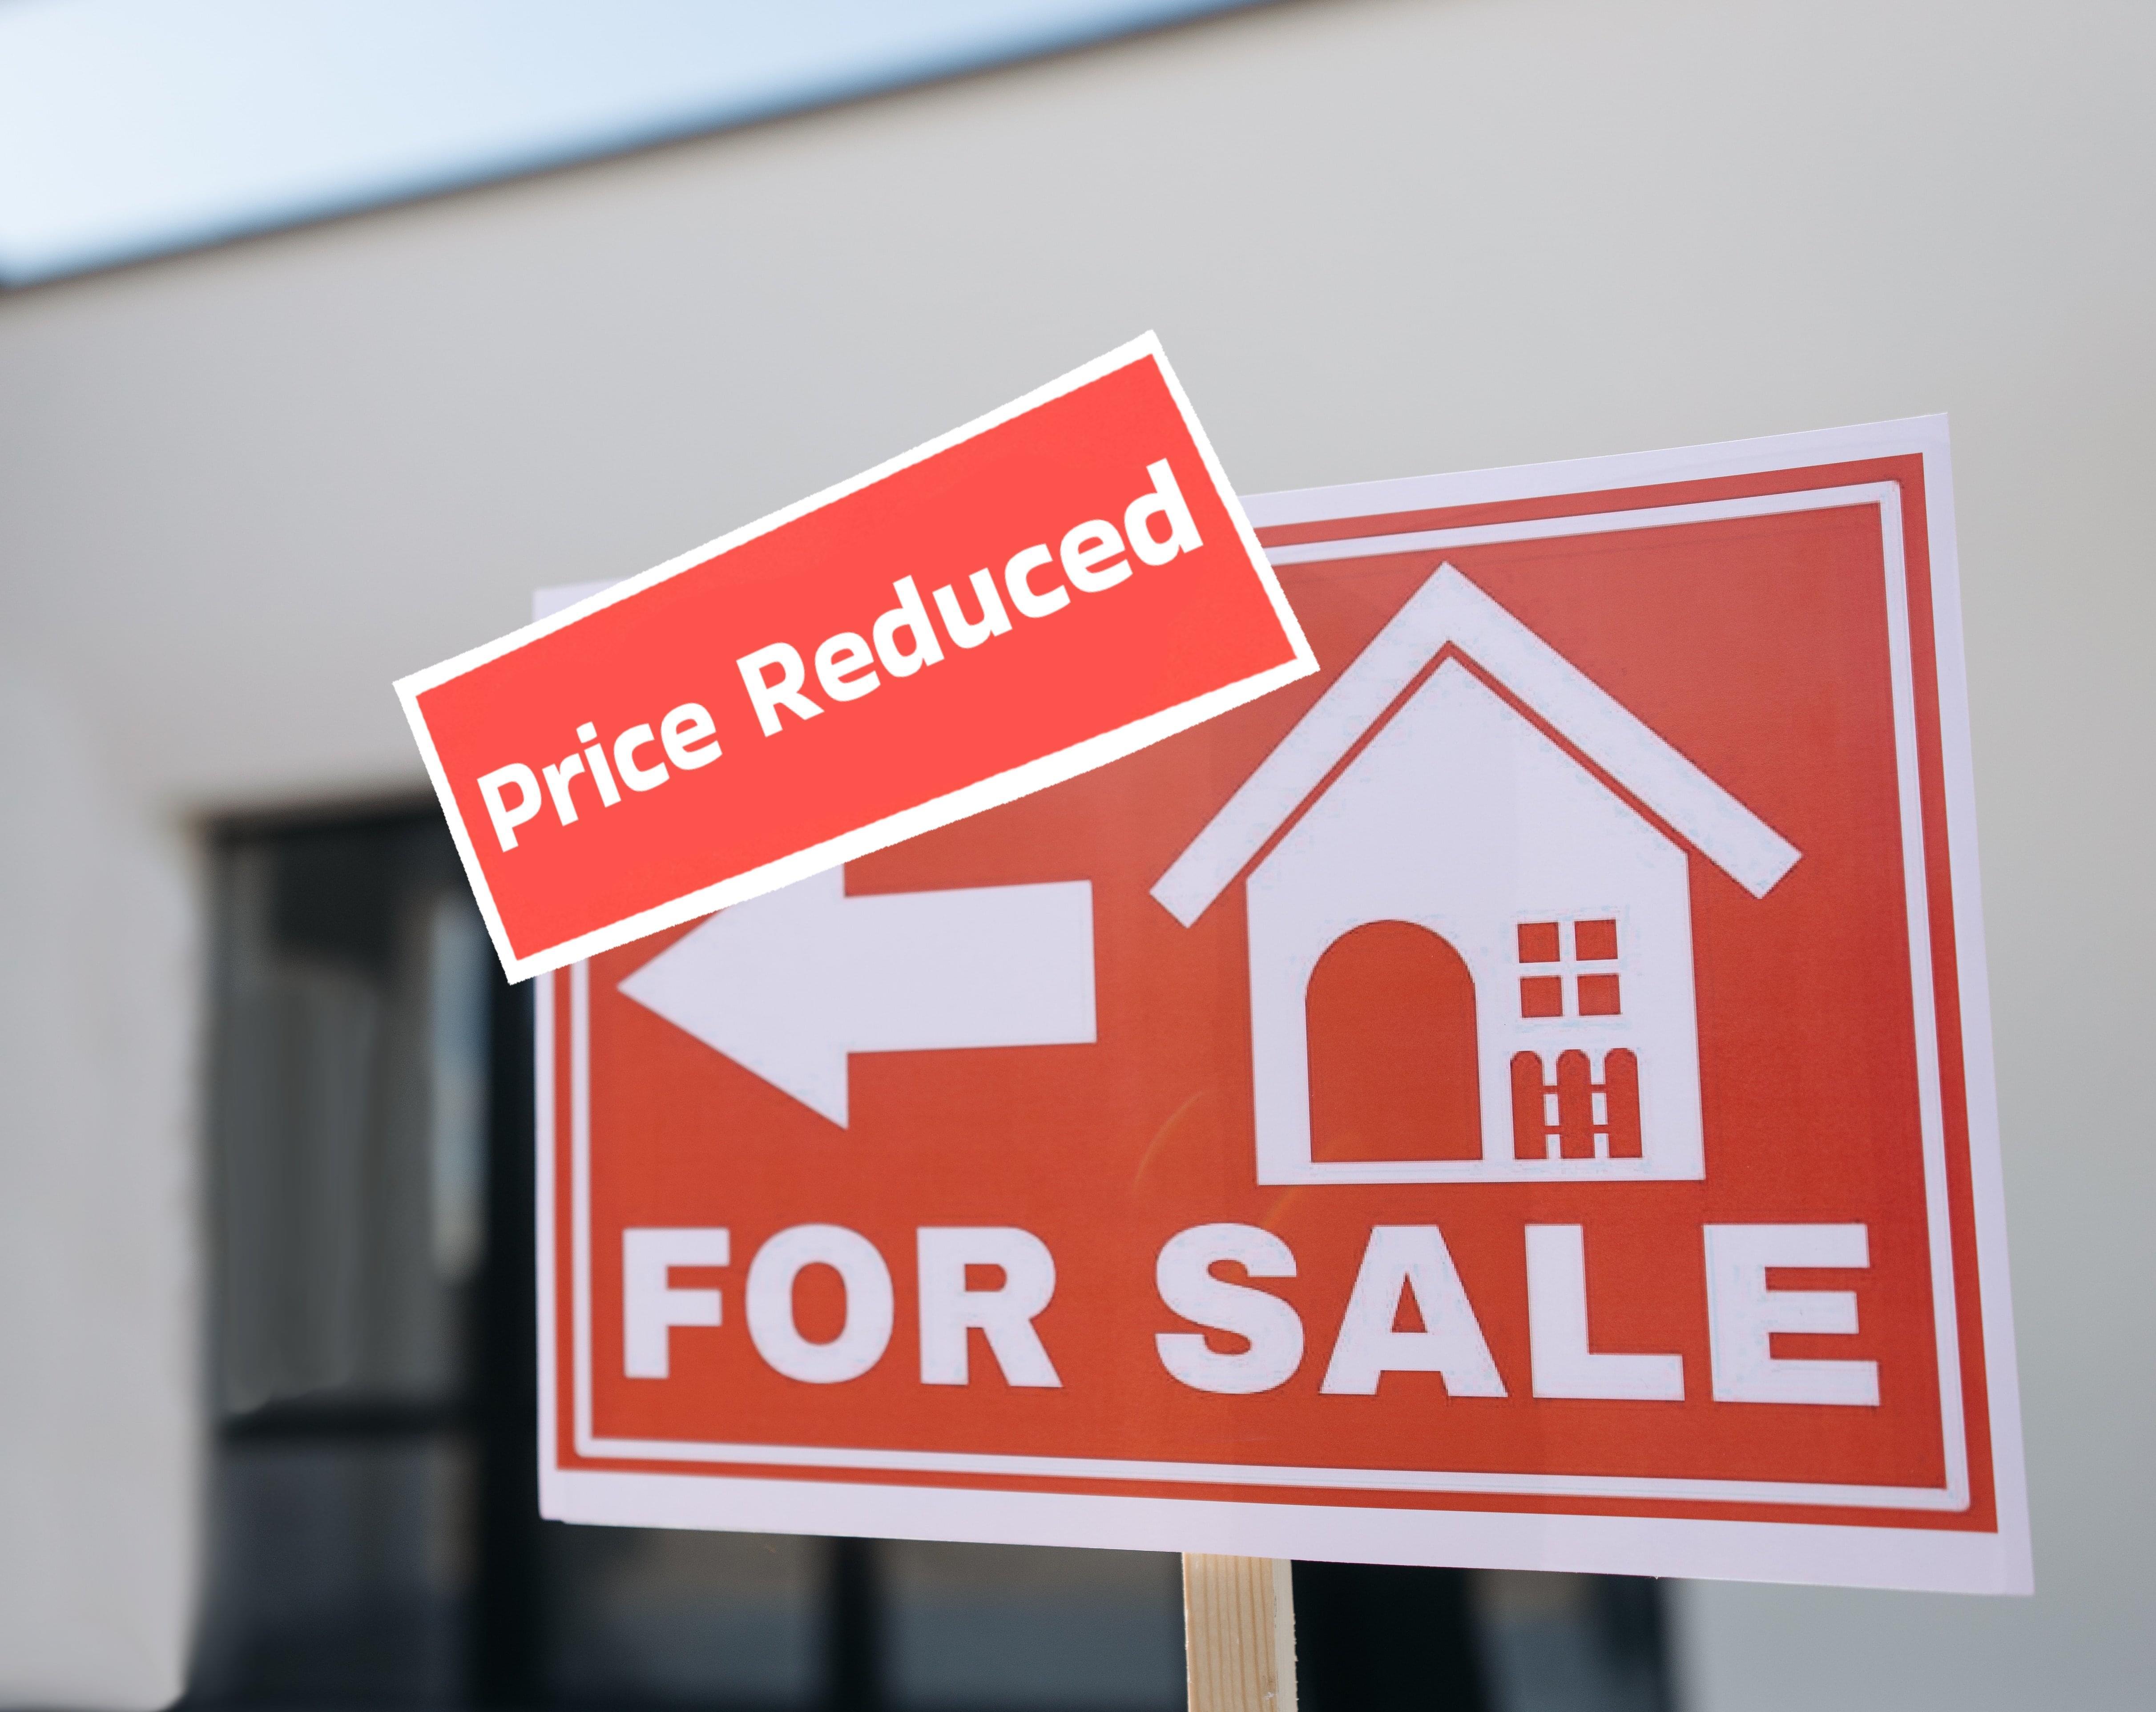 A house for sale sign with an additional price reduced sign